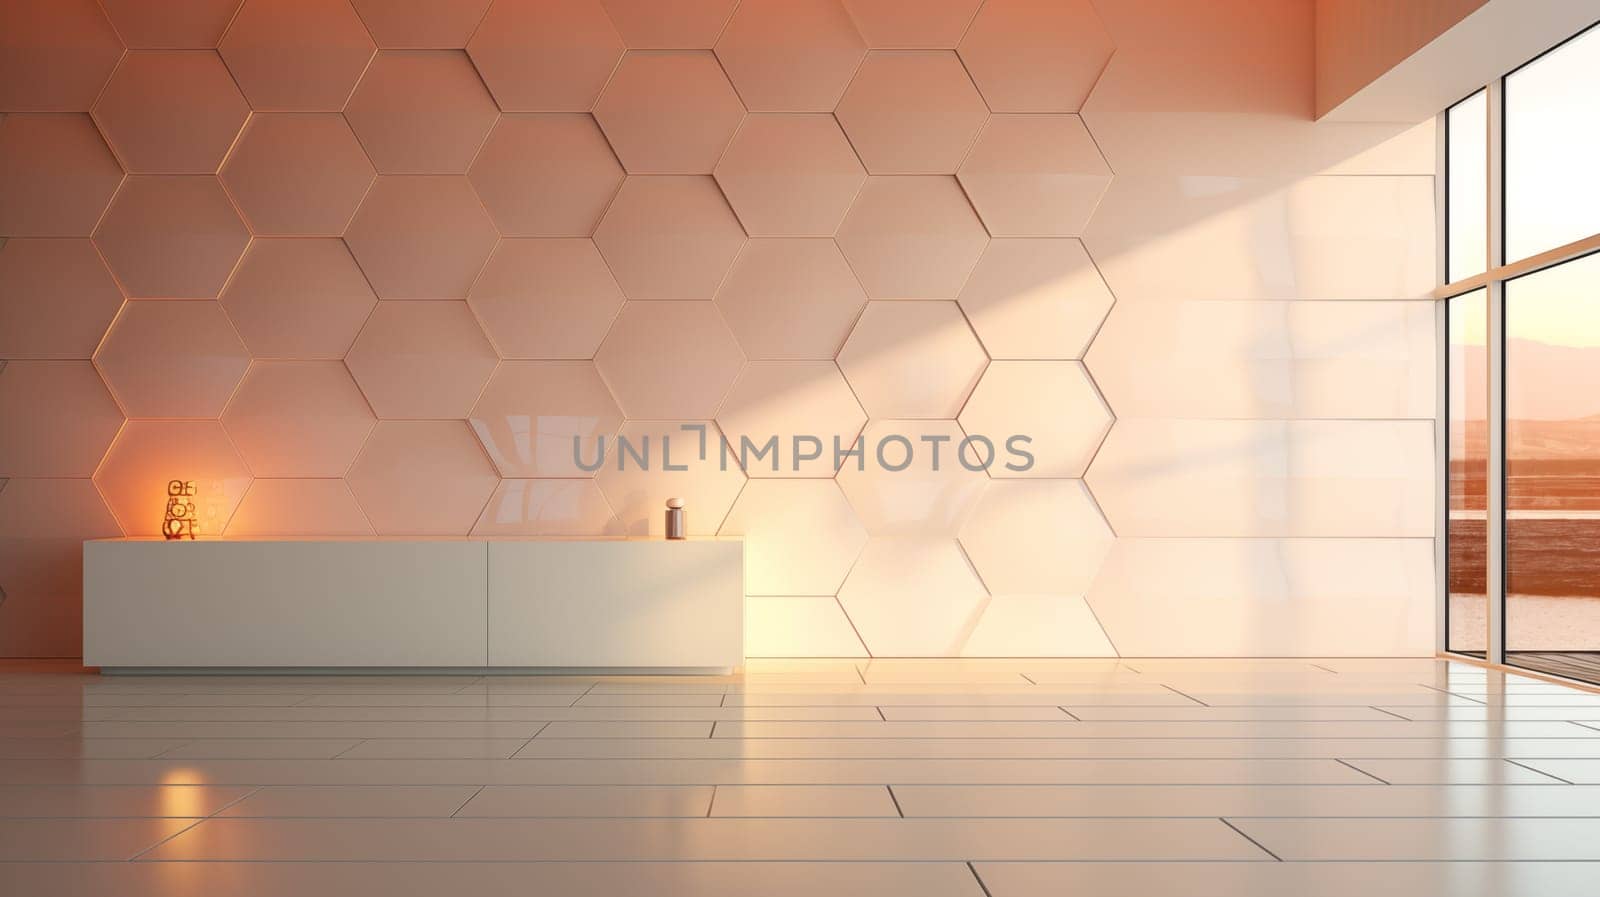 Reception desk in a modern lobby with geometric wall design, sunset view.